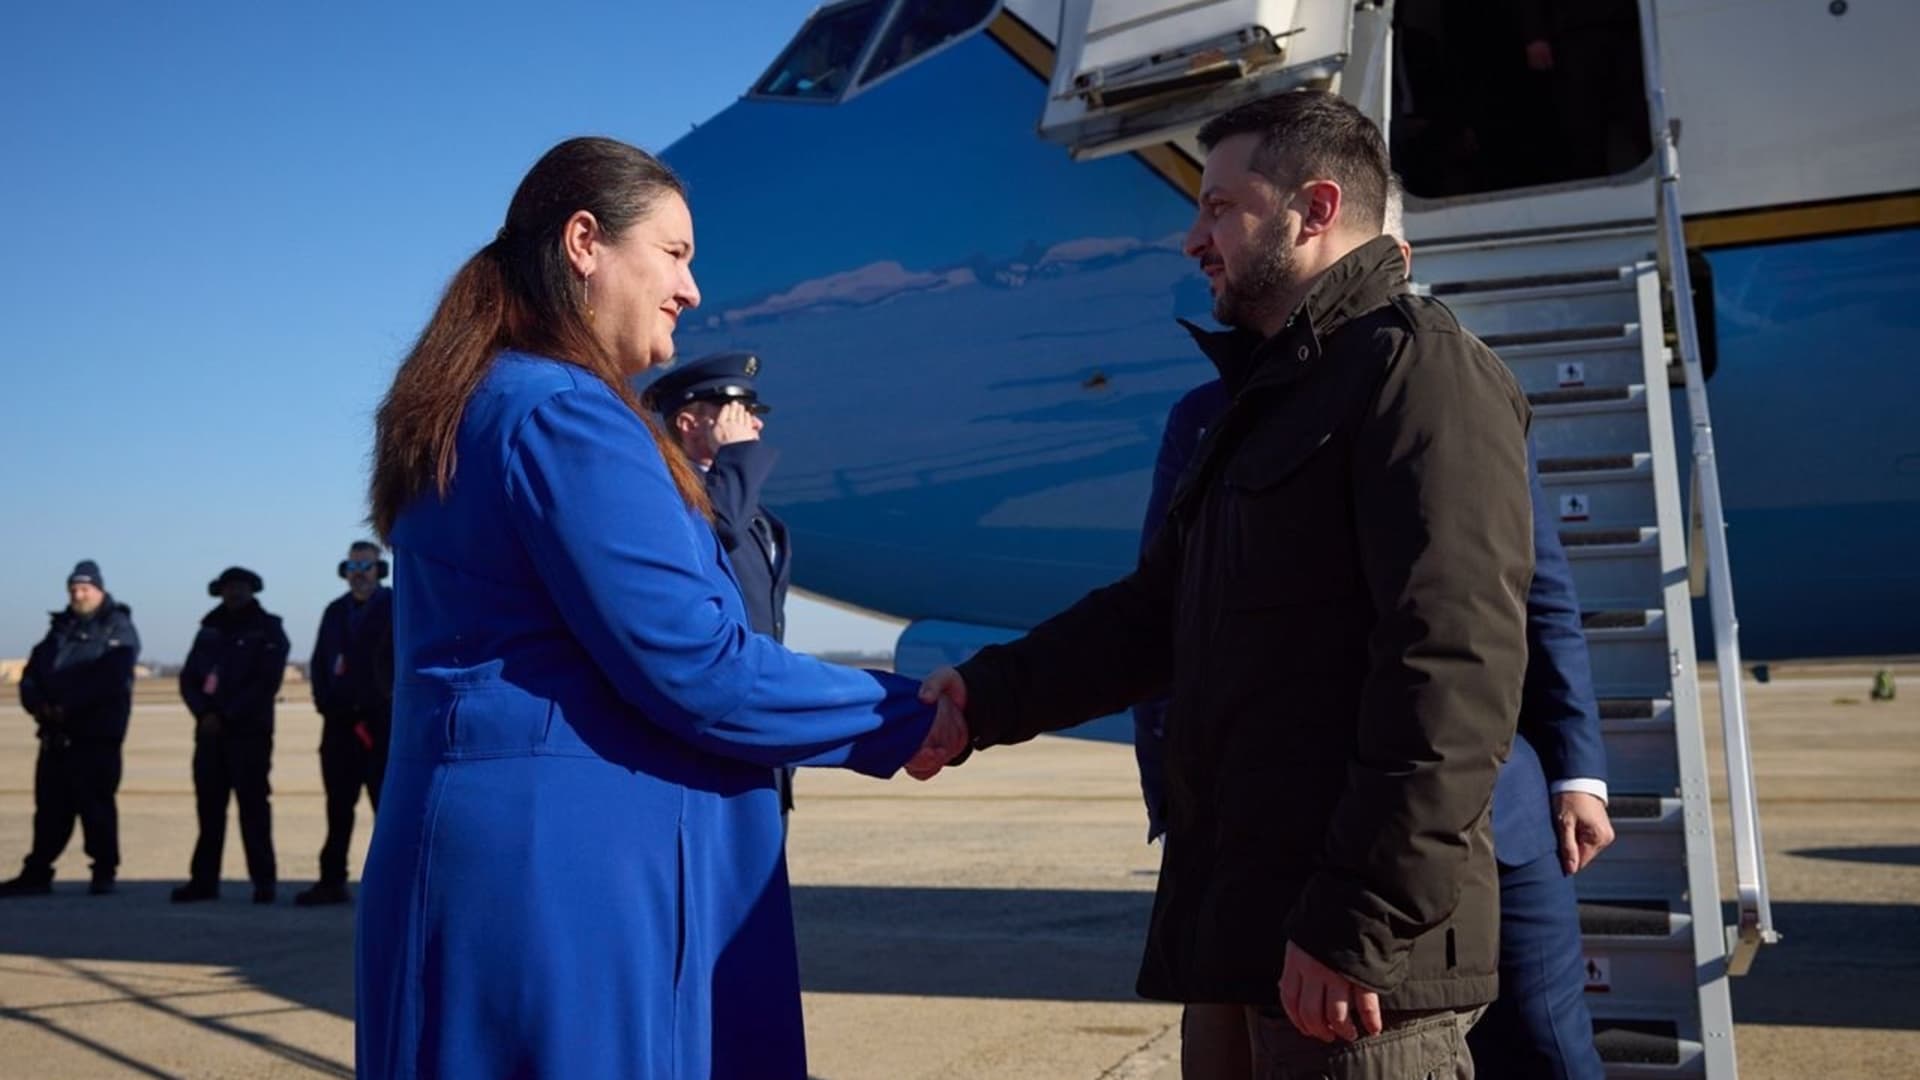 Ukrainian President Zelenskyy arrives in Washington for first foreign visit since start of war with Russia in Washington D.C., United States on December 21, 2022. 